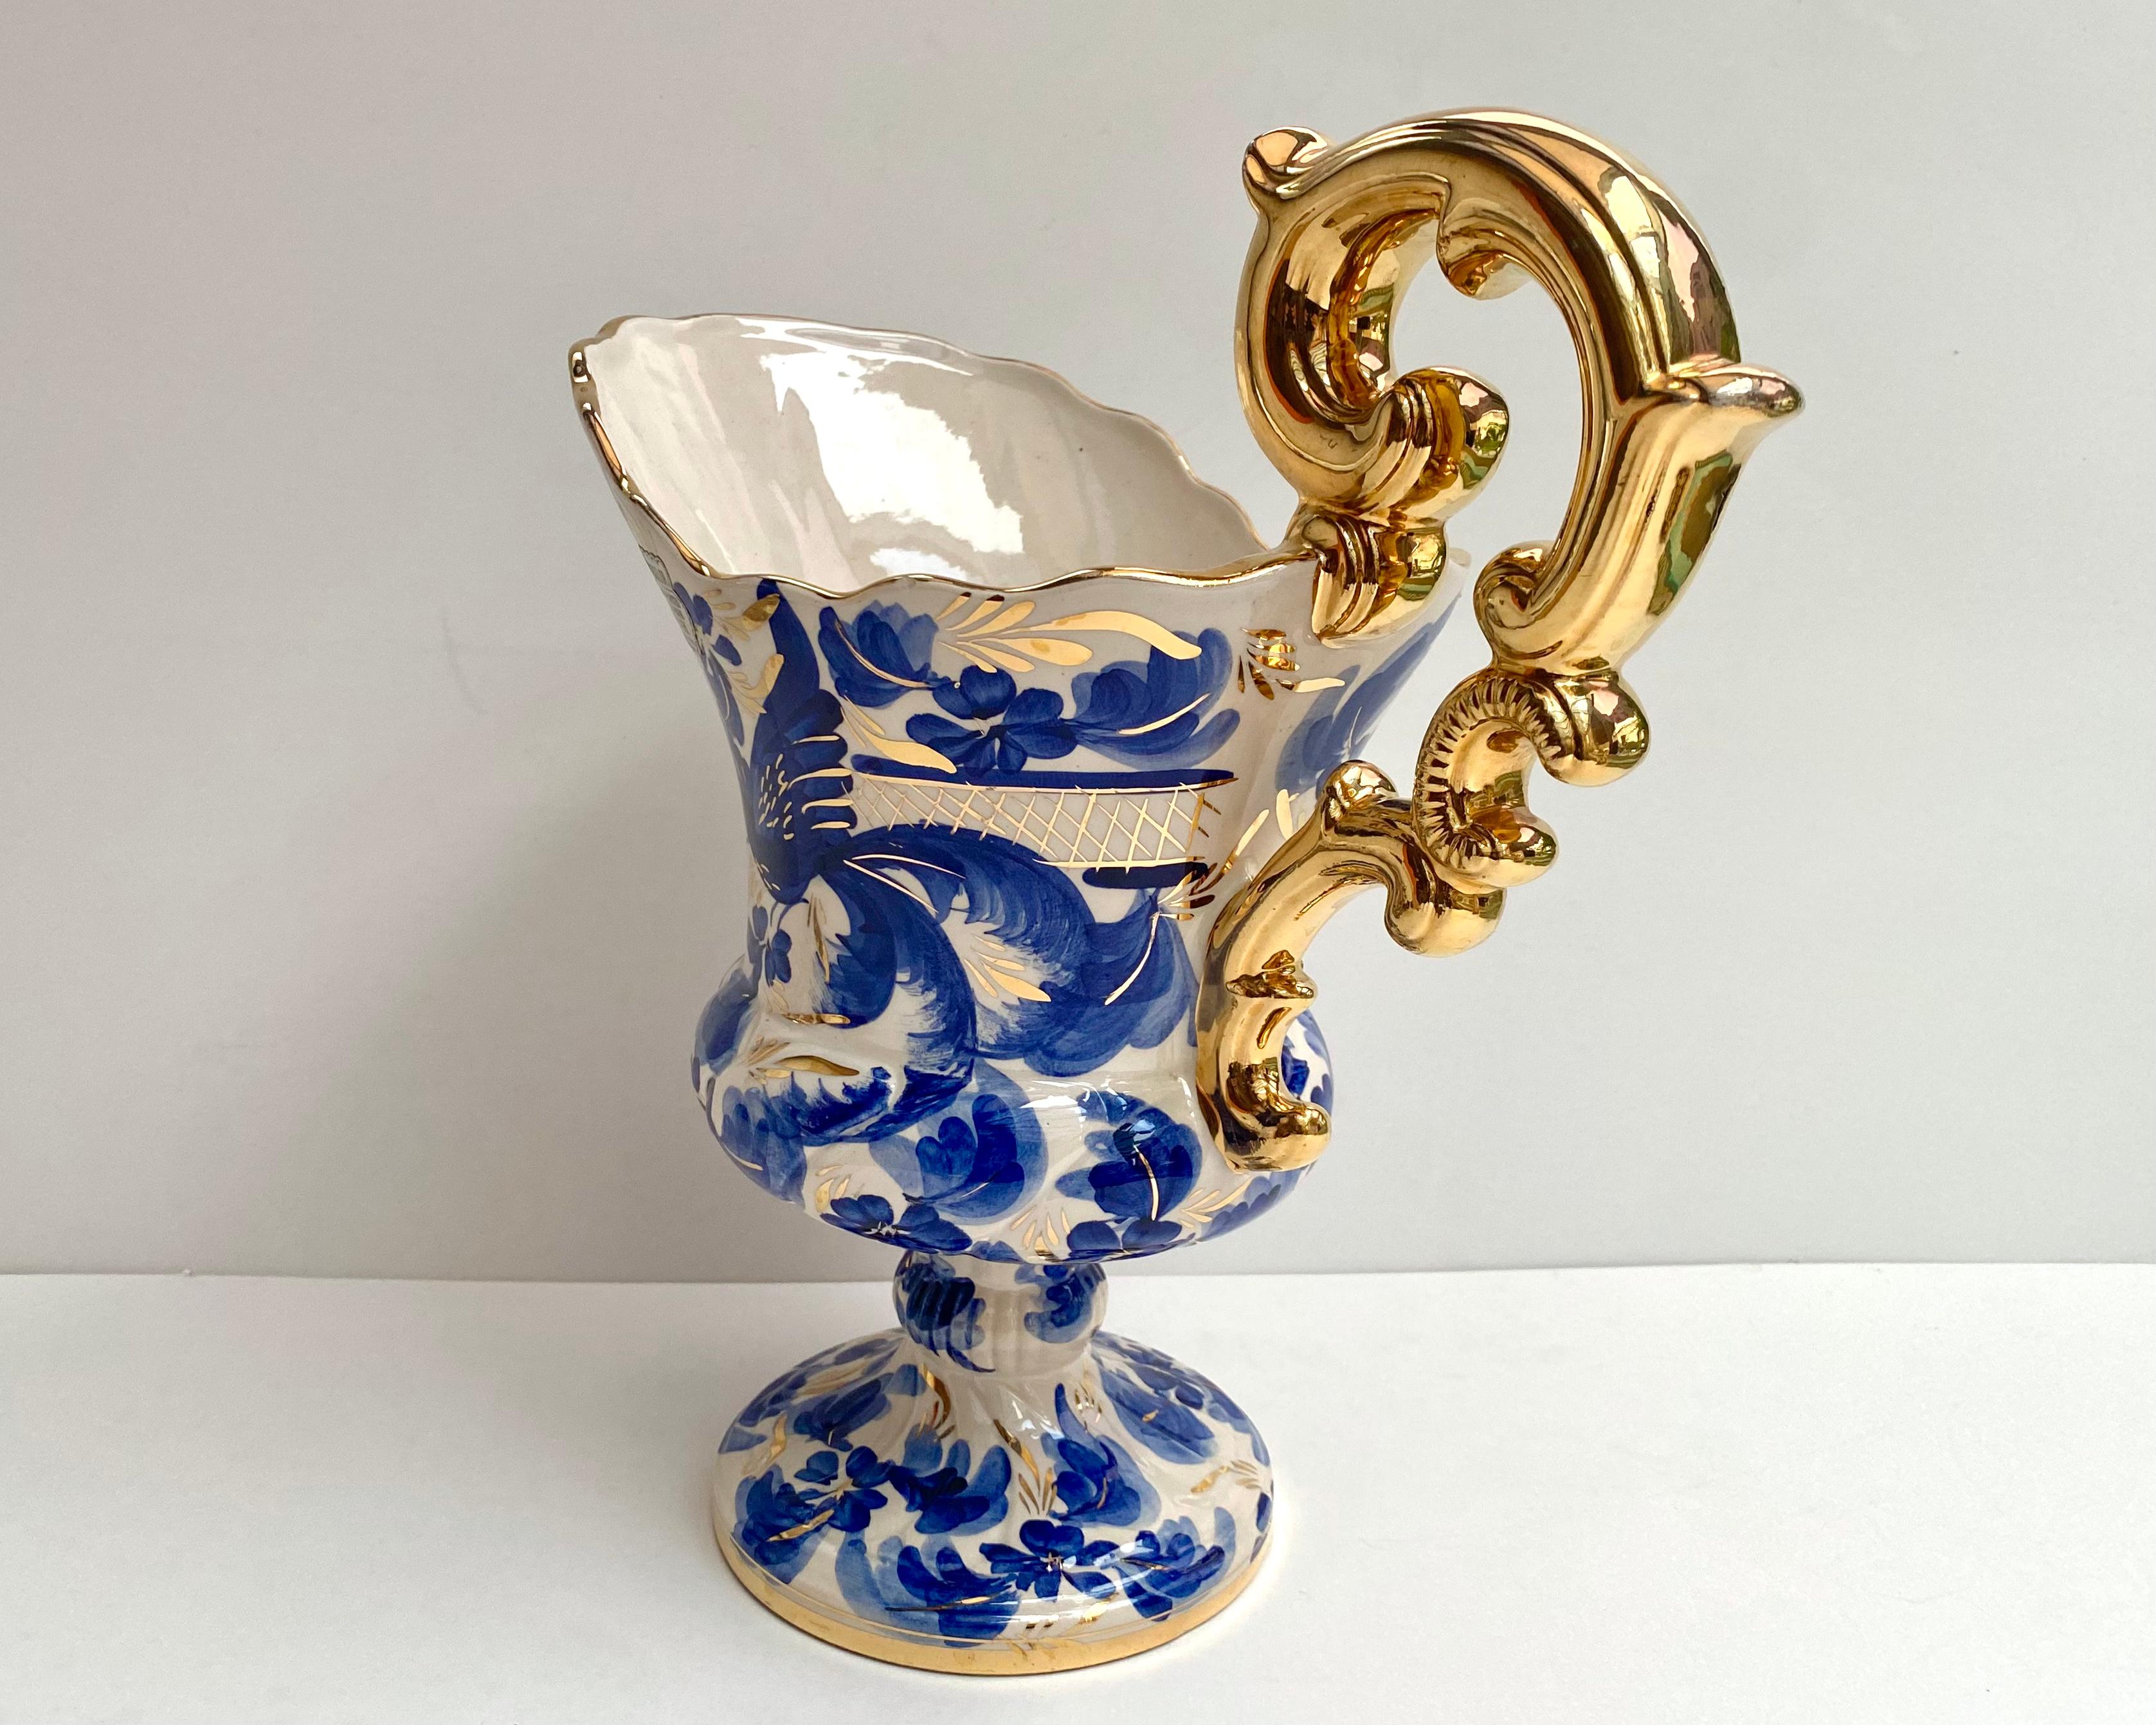 Gorgeous Hubert Bequet ceramic pitcher vase with a beautifull hand painted blue pattern. 

Decorated with 24K gold.   Belgium,  1960s.  

All hand crafted and hand painted.  

All accents in gold including the scroll handle and neck “cut